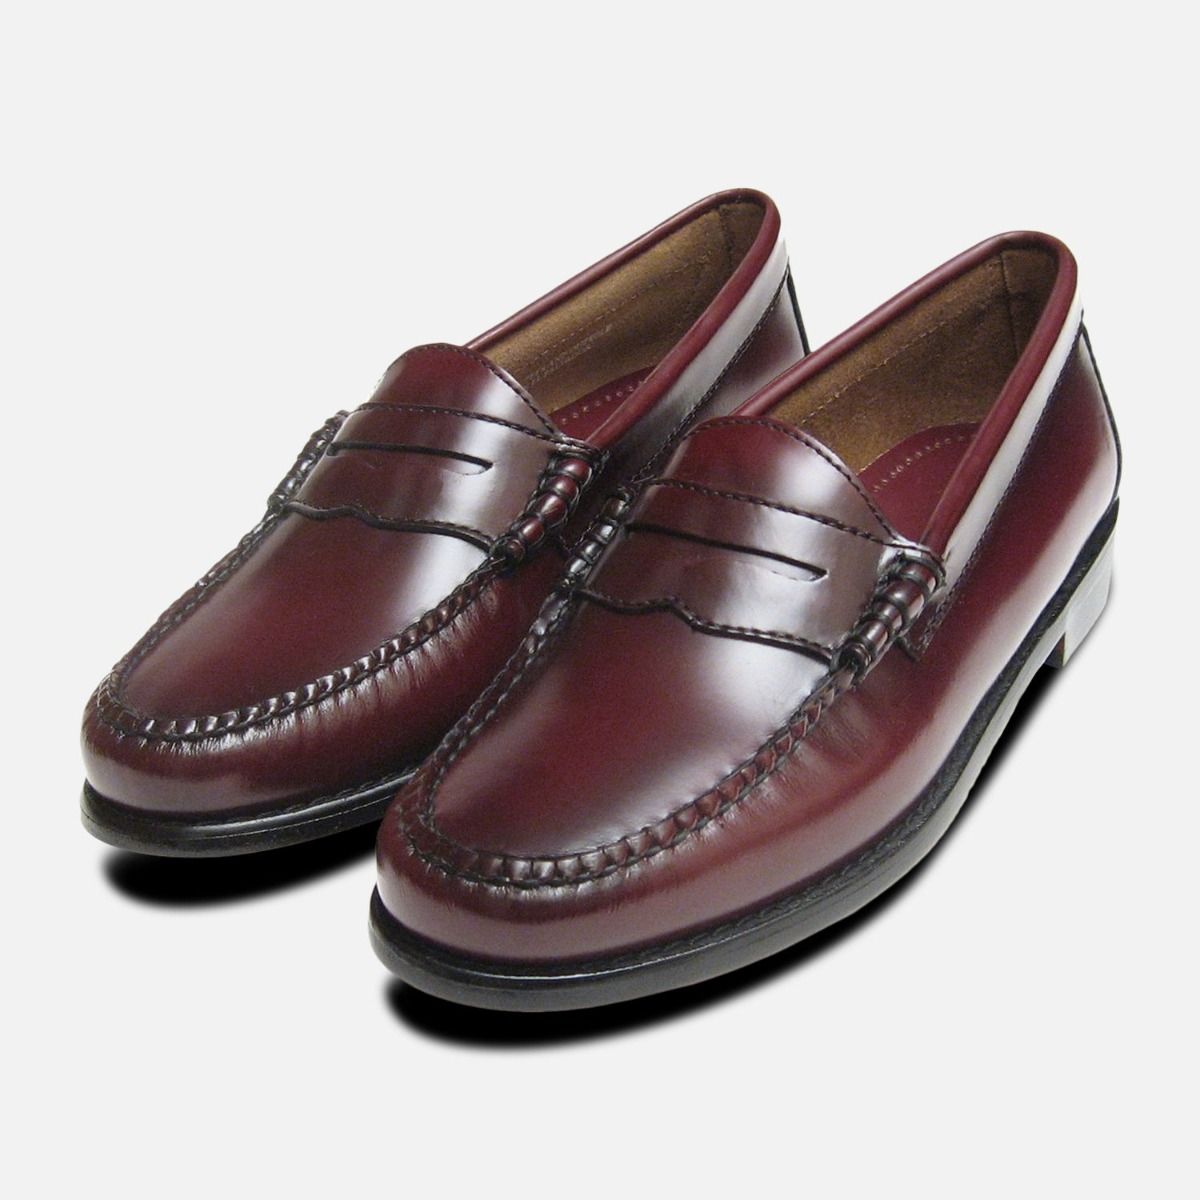 Ladies Burgundy Leather Bass Loafers